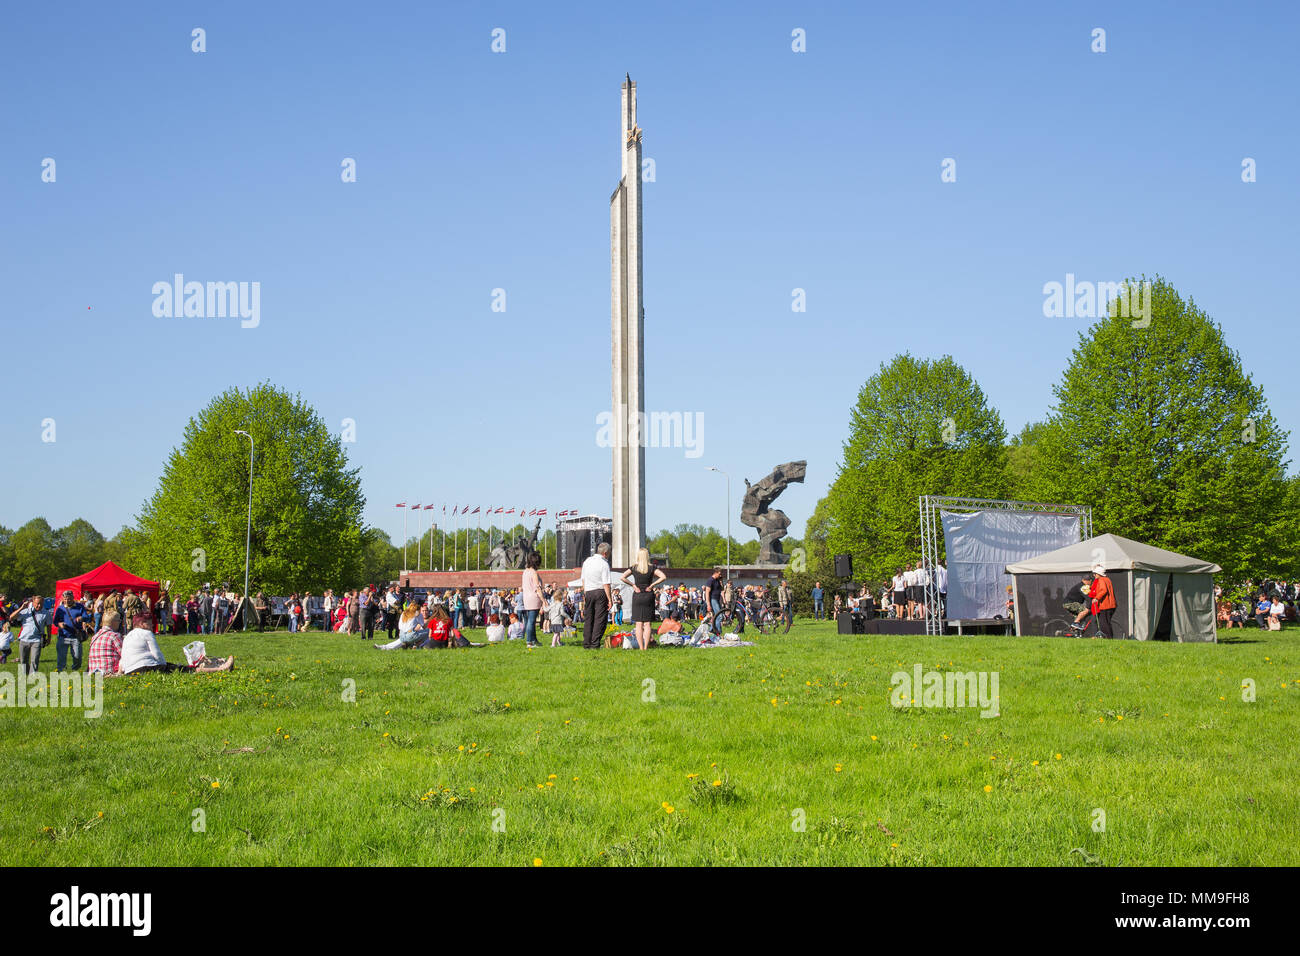 Latvia, city Riga, Victory park, May 9, celebration 73 year after world war 2, peoples, flowers and sun. Travel photo 2018 Stock Photo